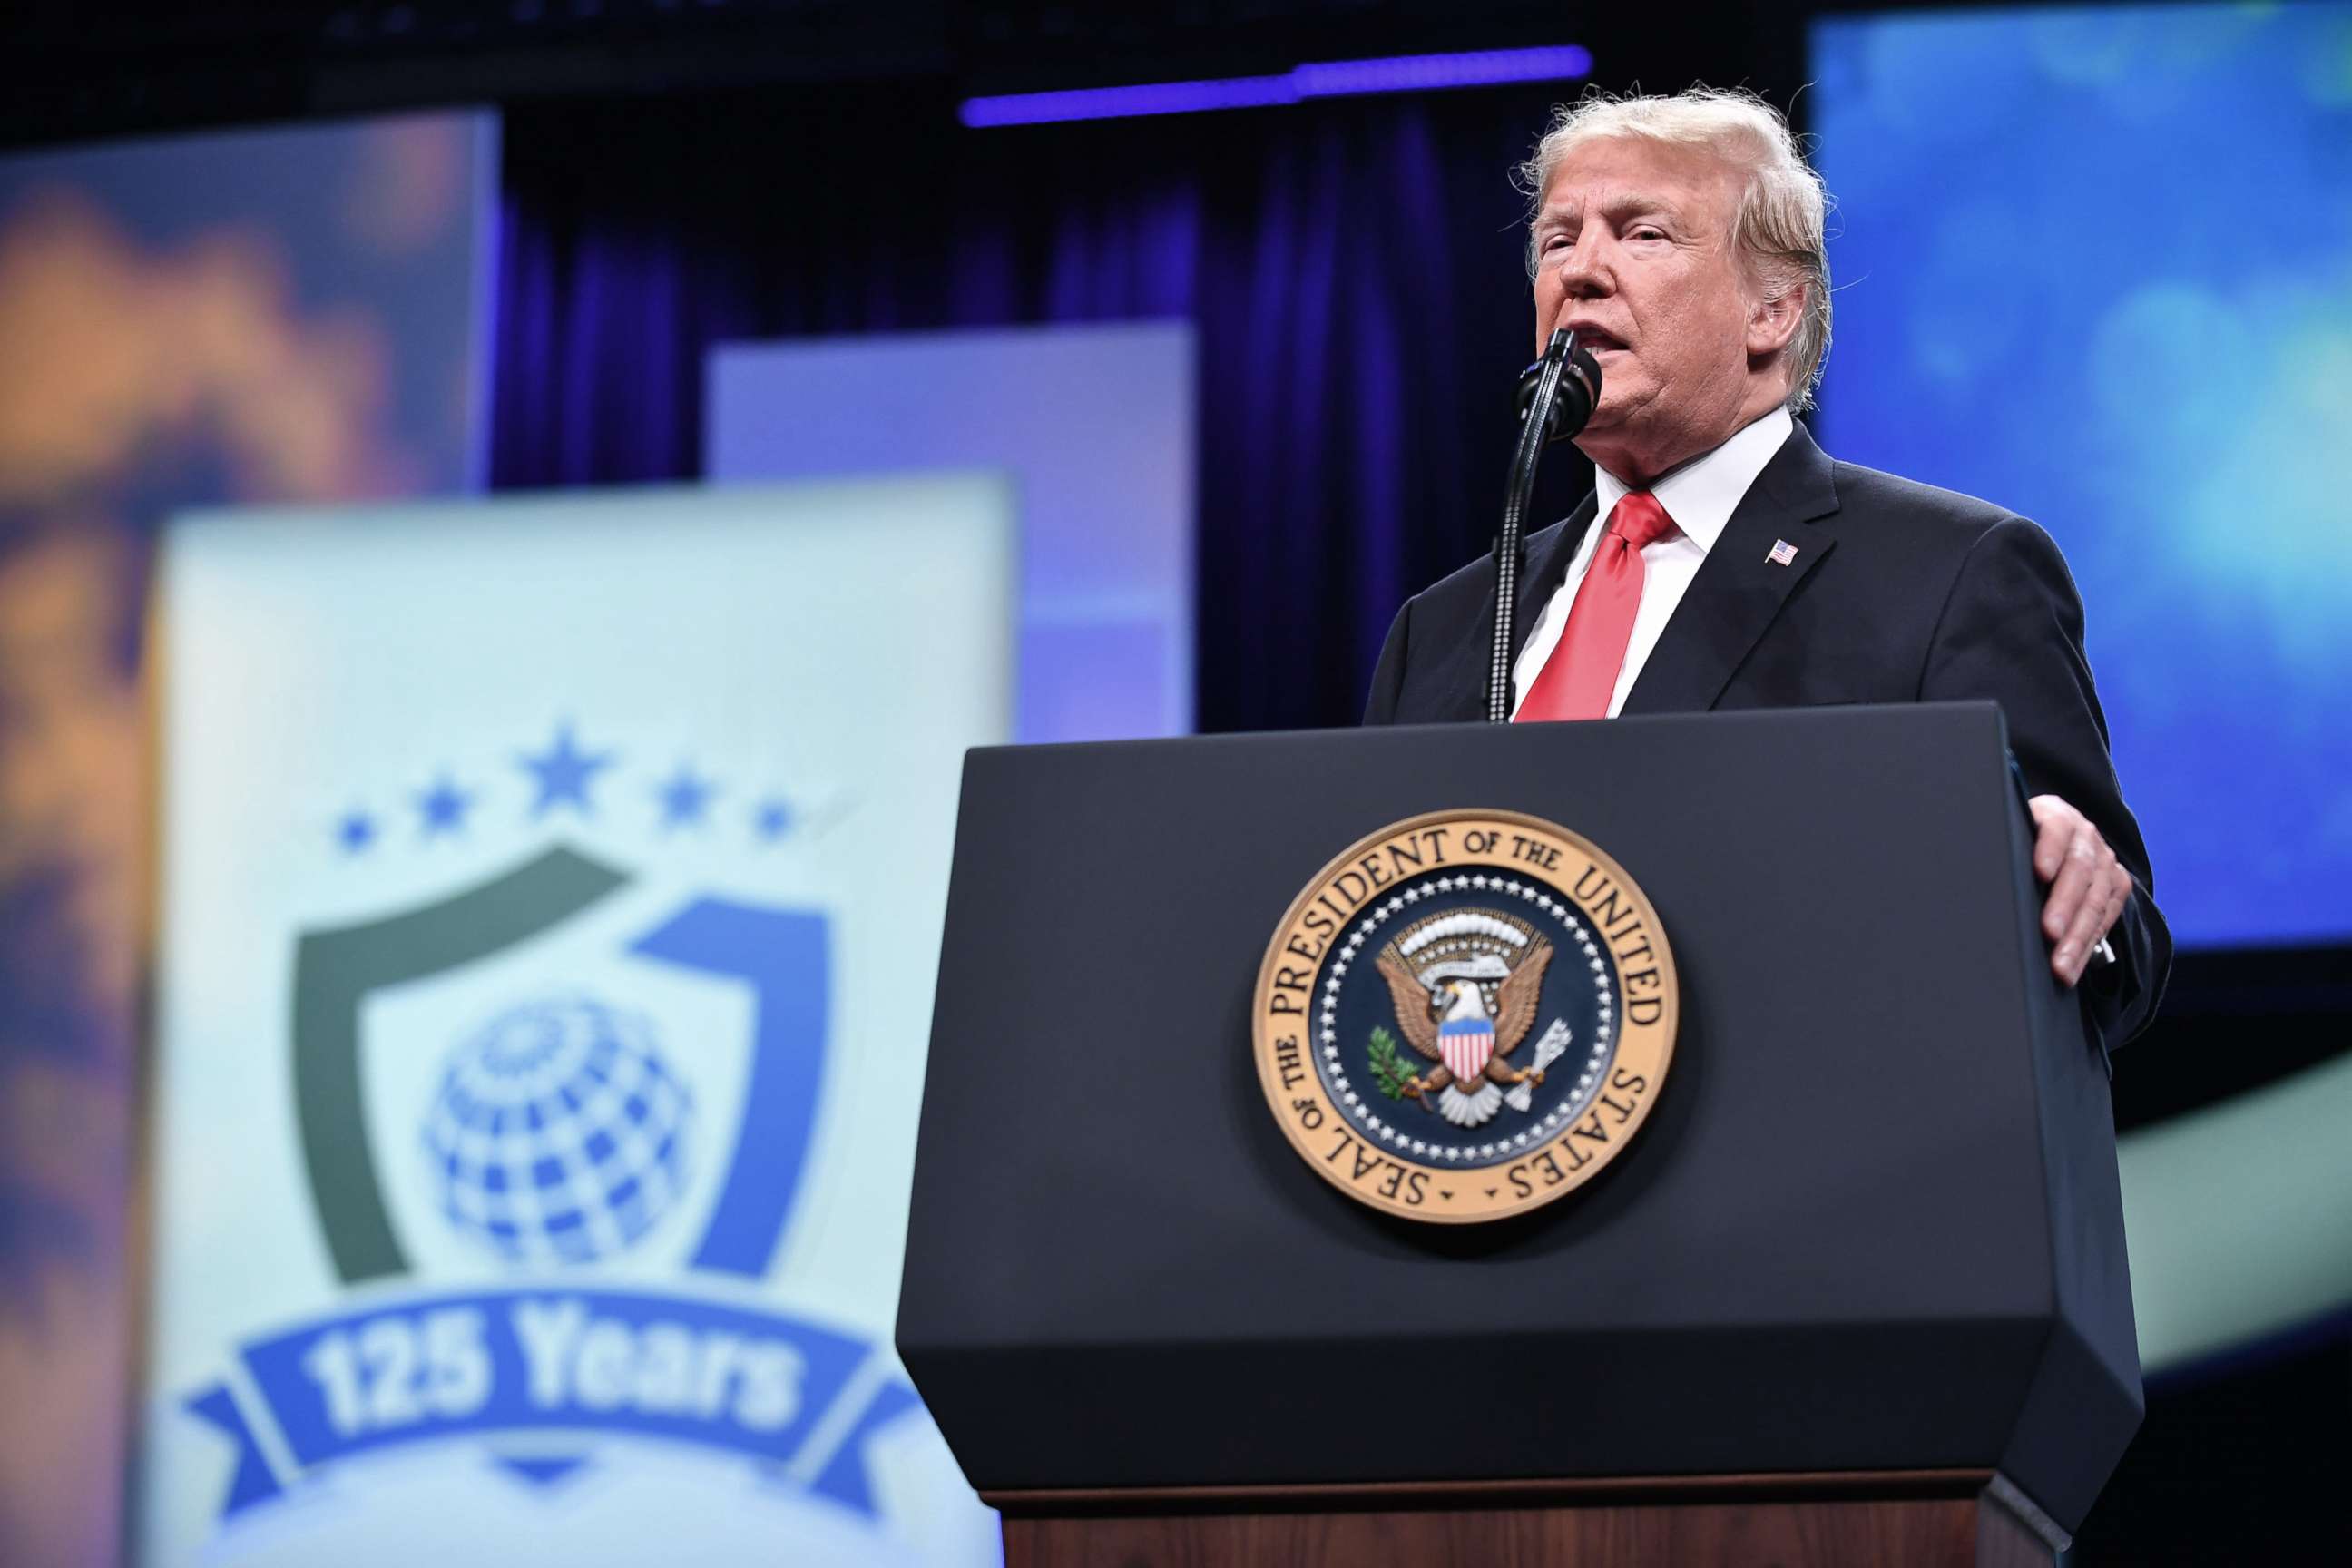 PHOTO: President Donald Trump addresses the International Association of Chiefs of Police (IACP) annual convention at the Orange County Convention Center in Orlando, Fla., Oct. 8, 2018. 